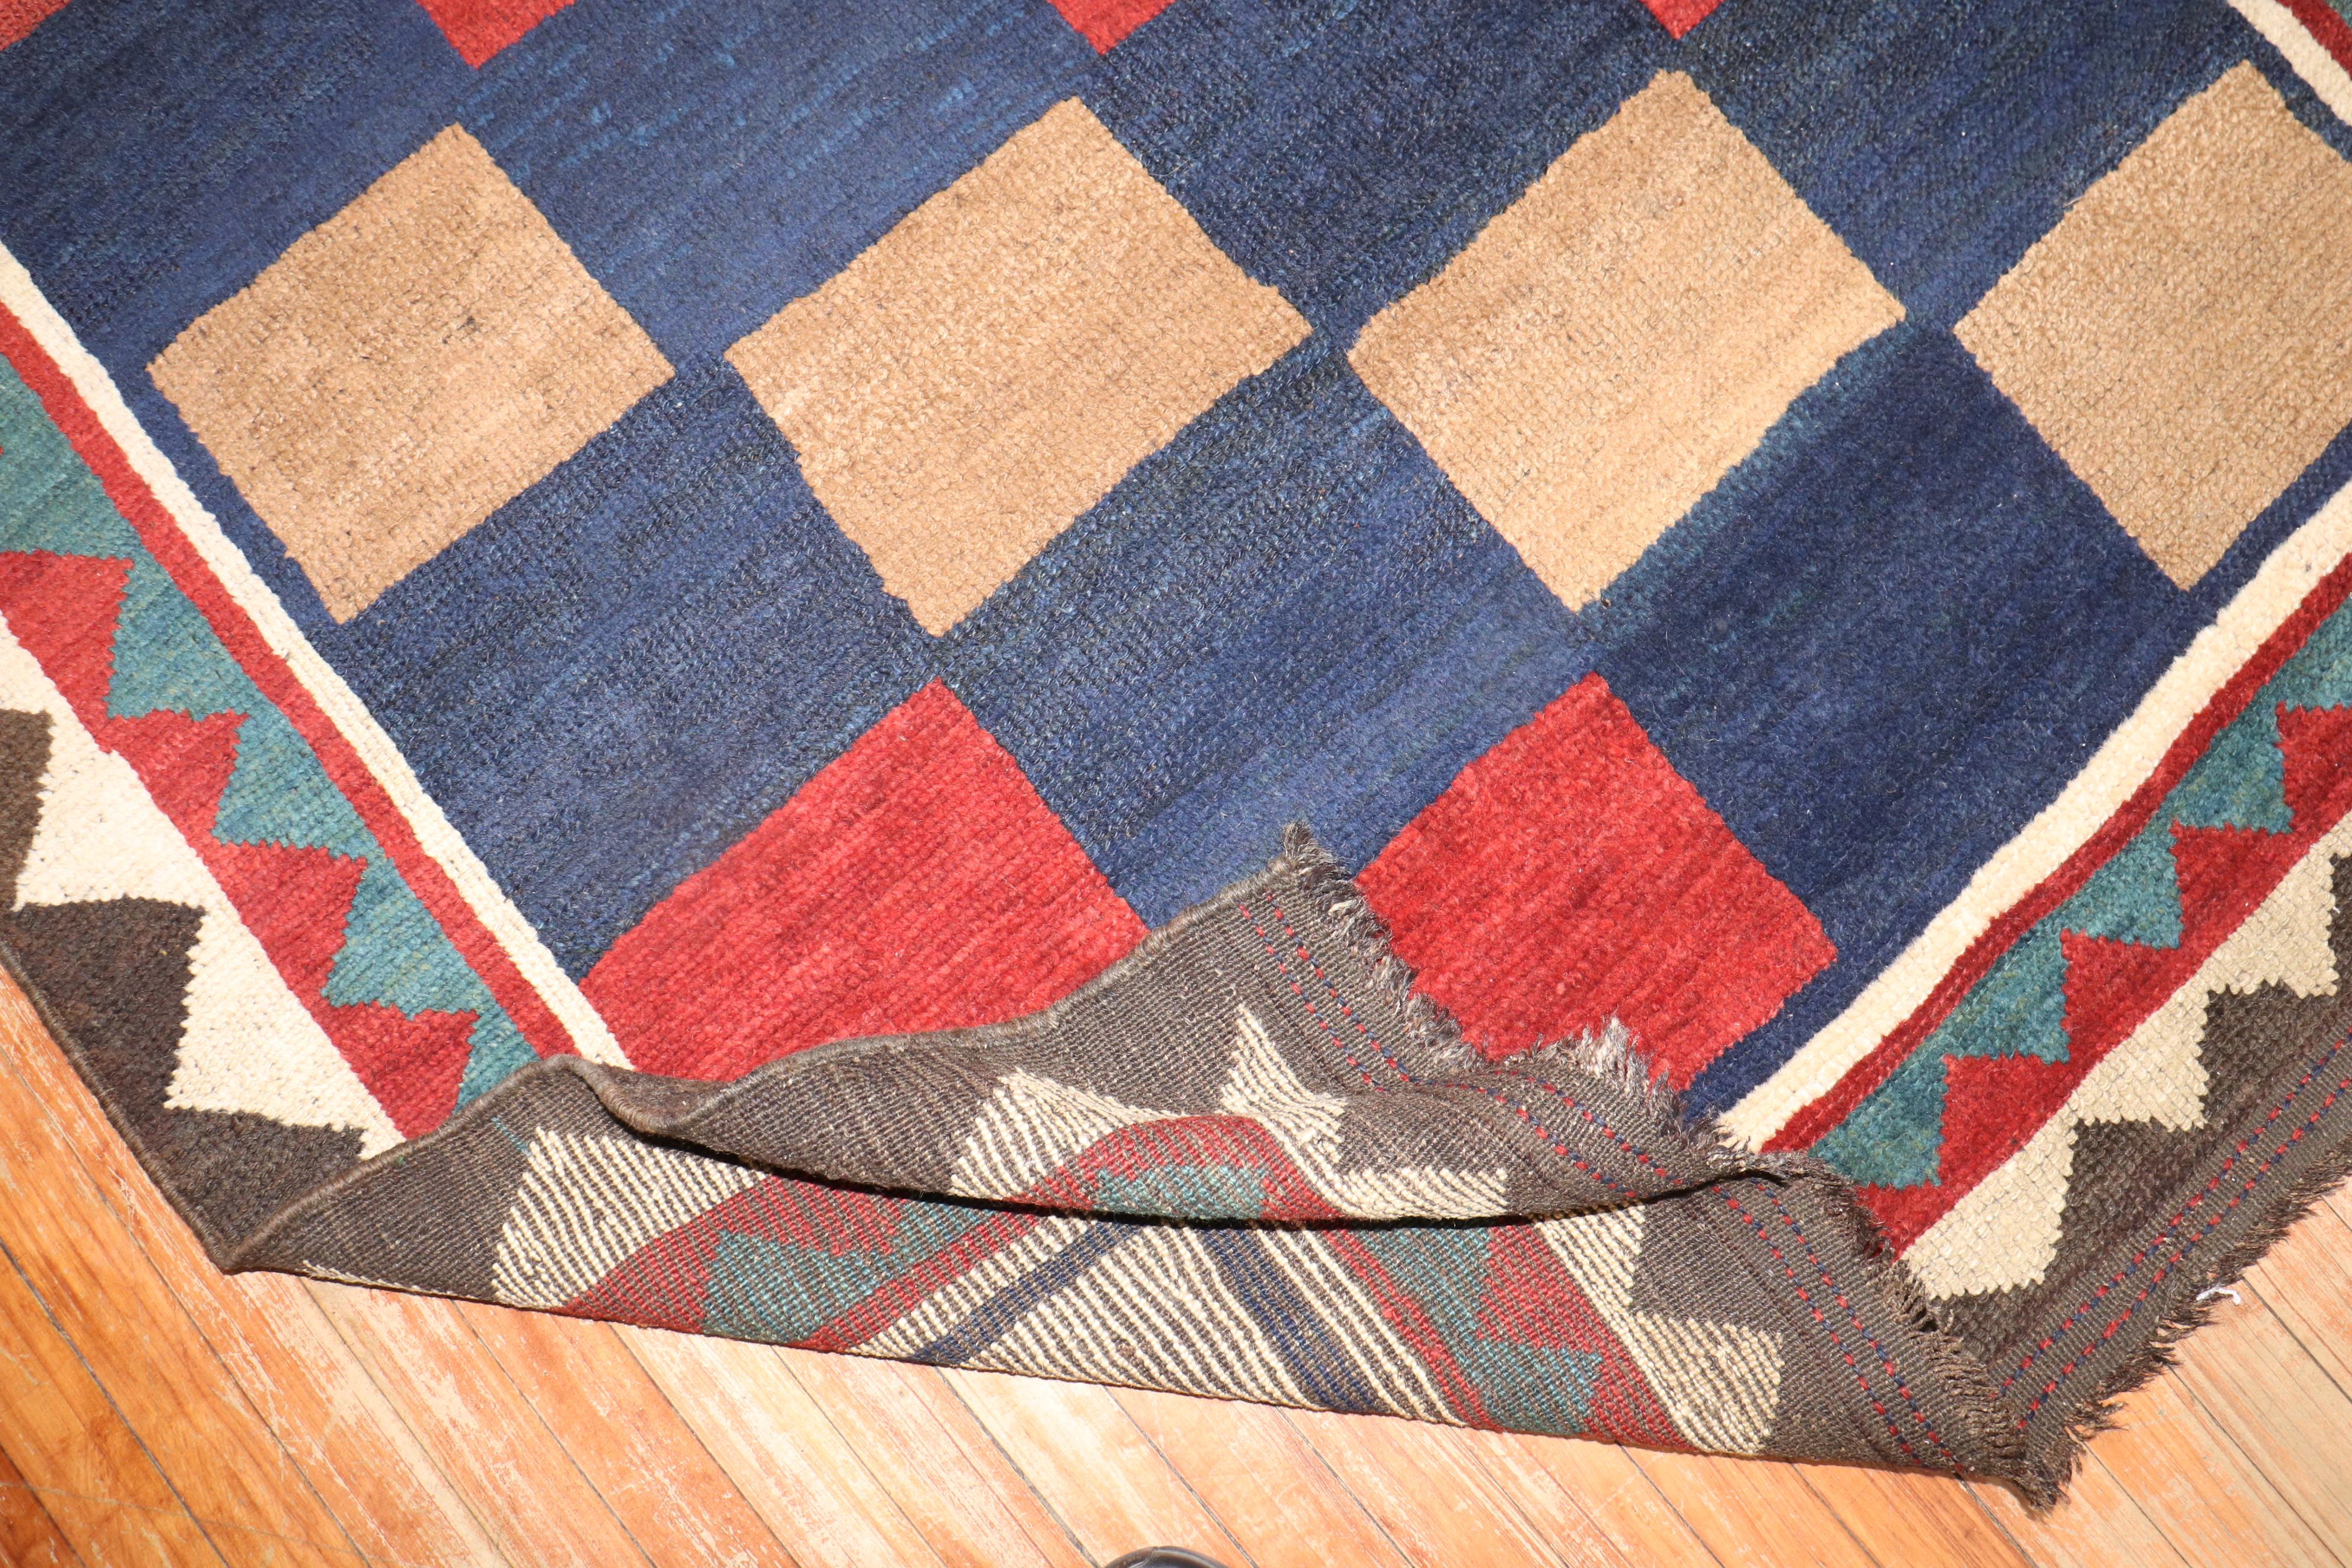 Mid-20th century Persian Gabbeh rug with an all-over repetitive box shape pattern

Measures: 4.11' x 7'.